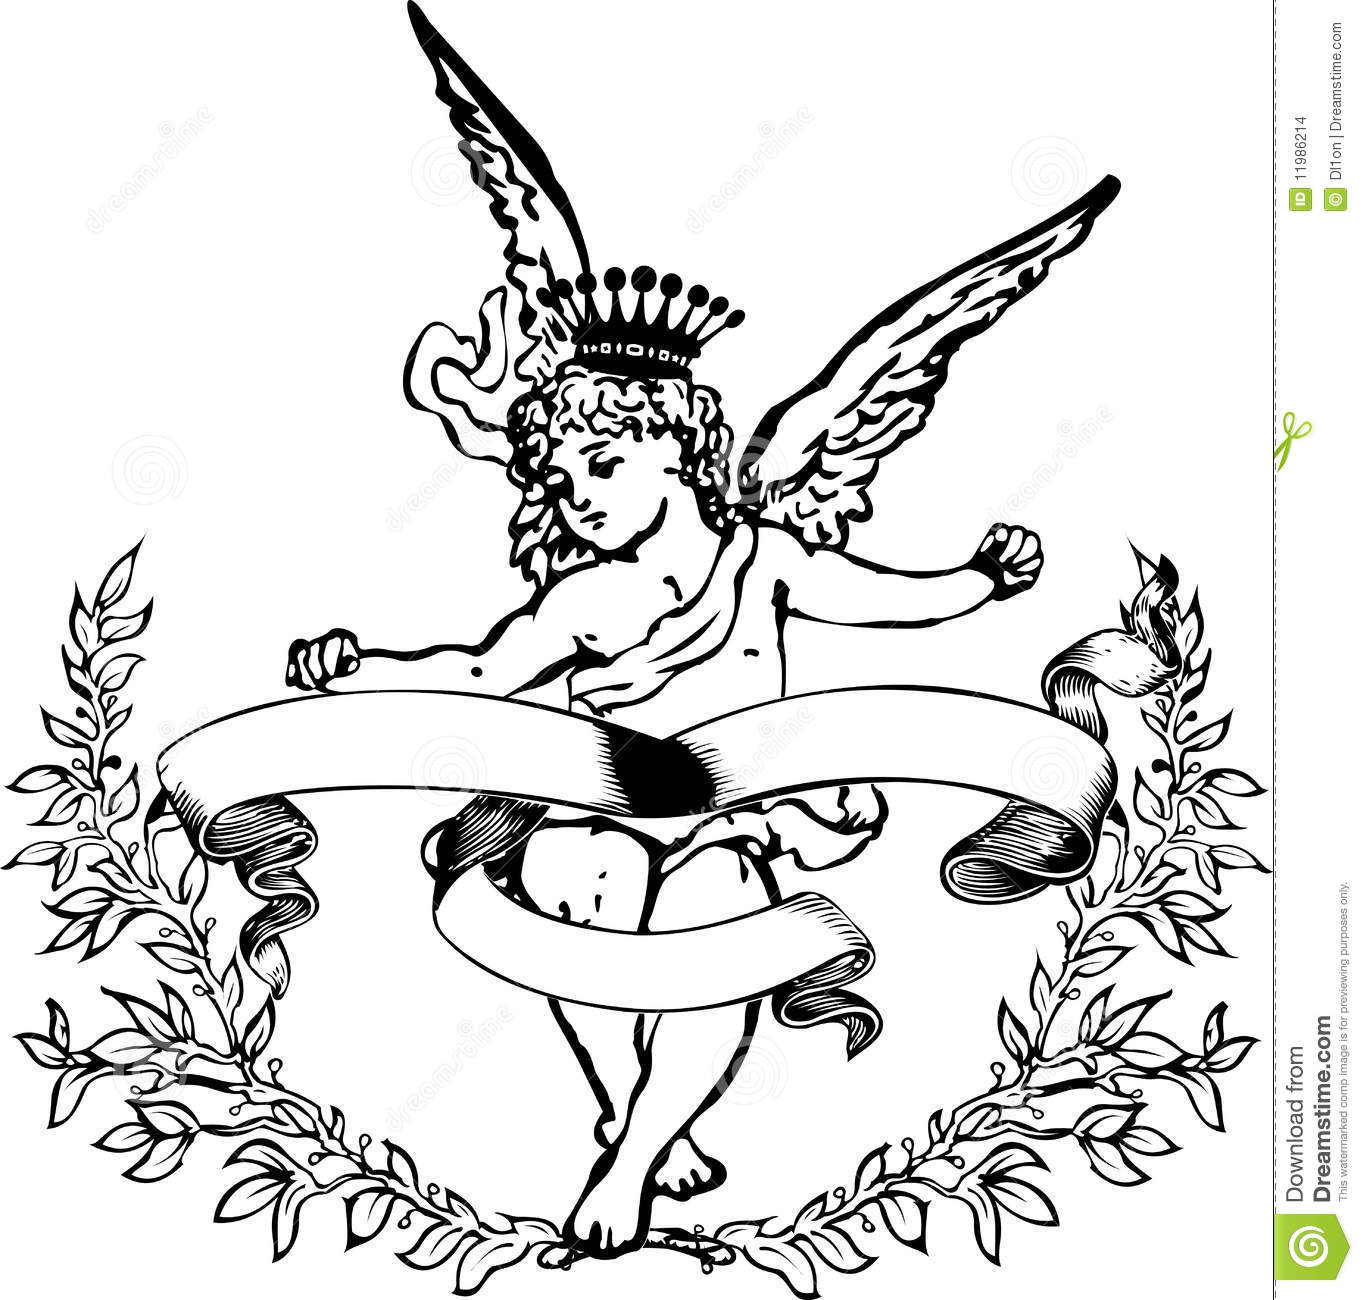 Black And White Crowned Cupid Heraldry  Stock Images   Image  11986214